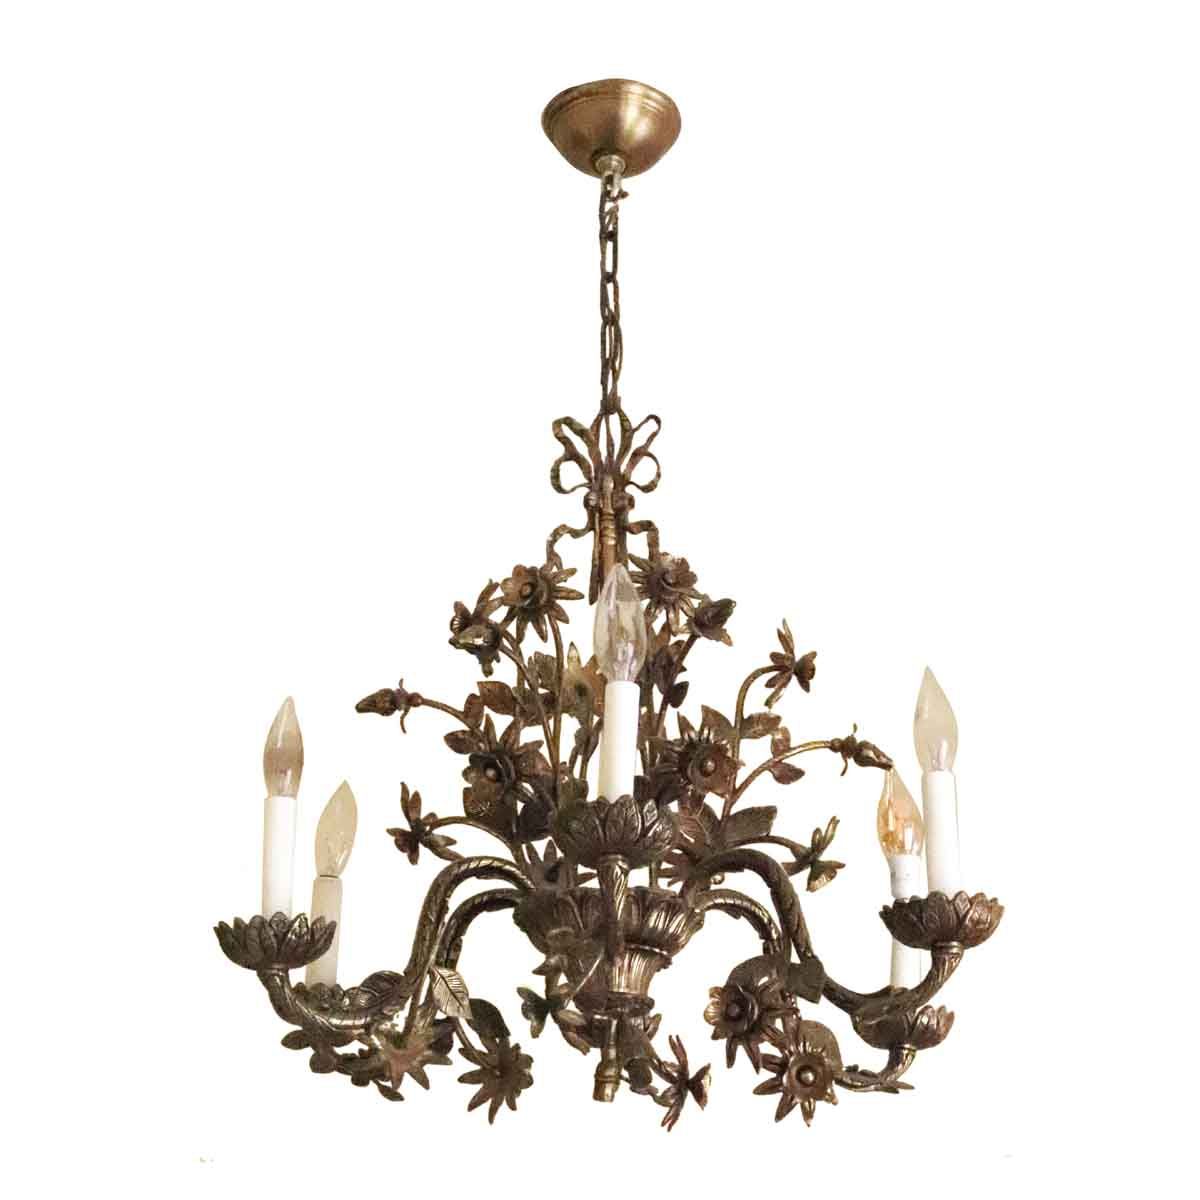 Salvaged Waldorf Brass Six Light Floral Chandelier | Olde Throughout Natural Brass Six Light Chandeliers (View 4 of 15)